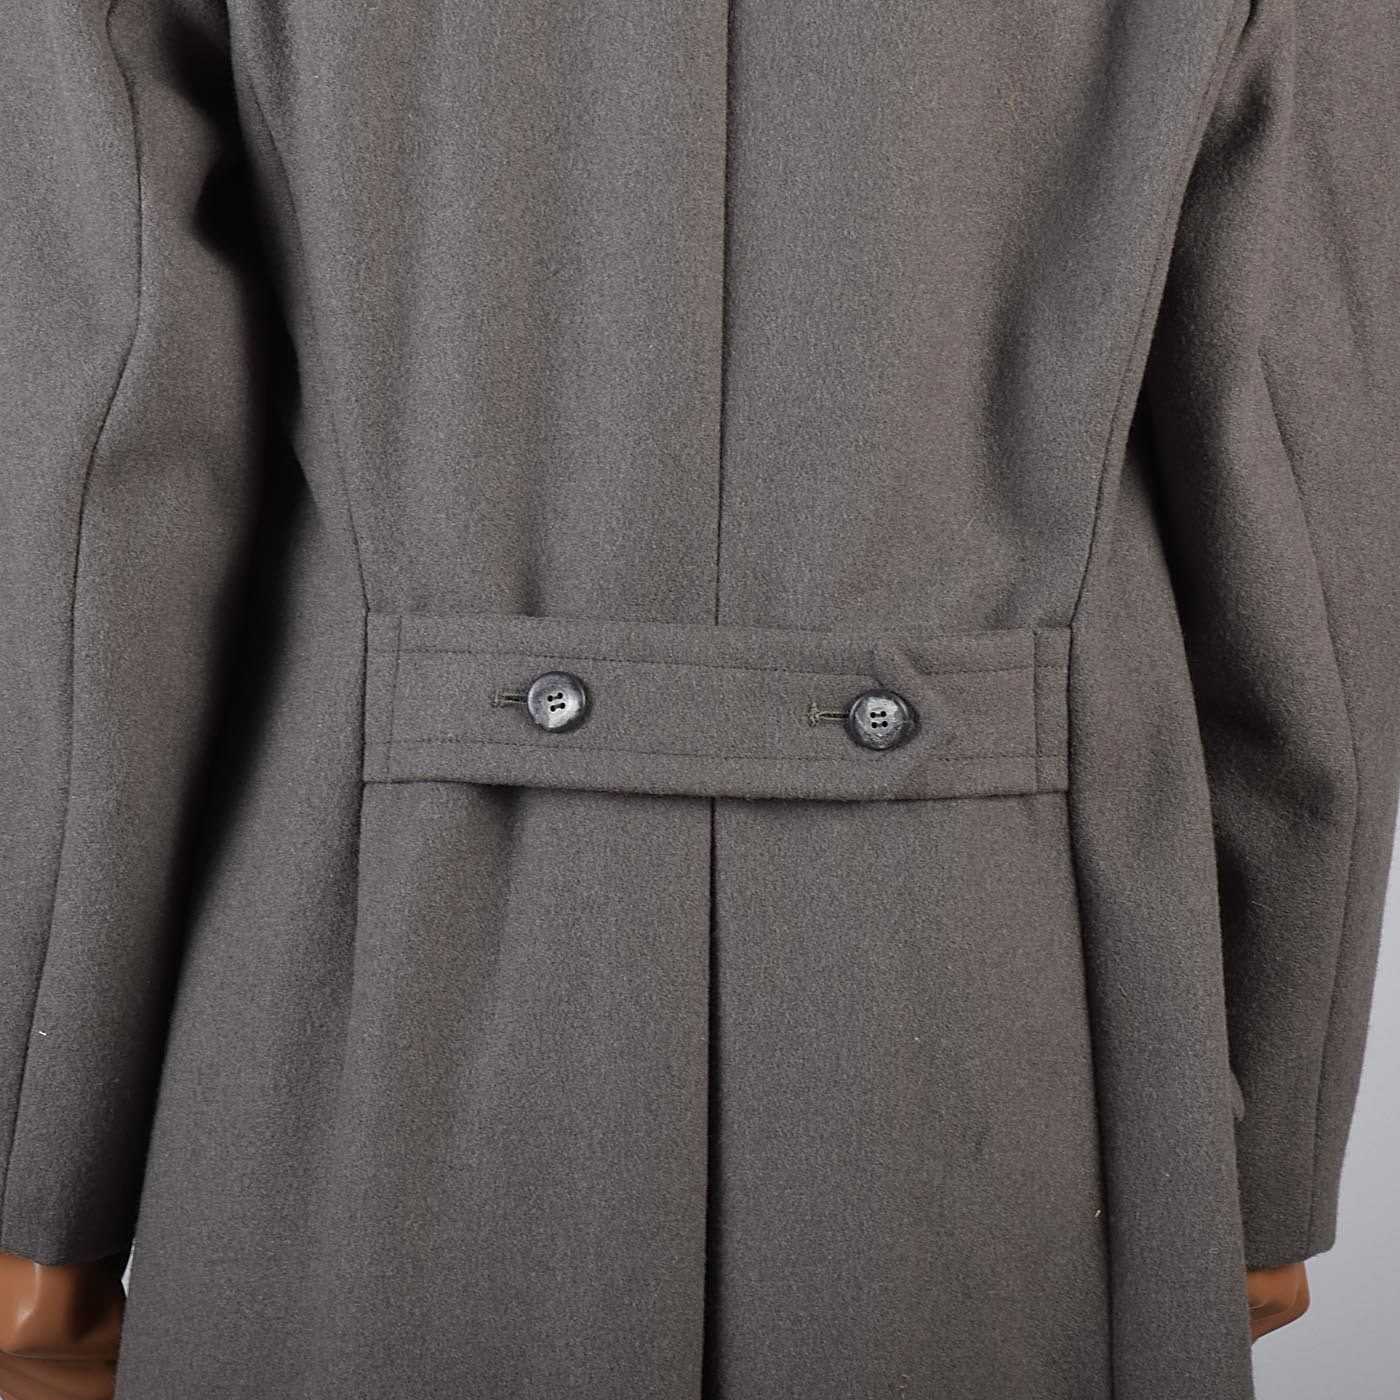 1970s Mens Two Tone Military Style Coat